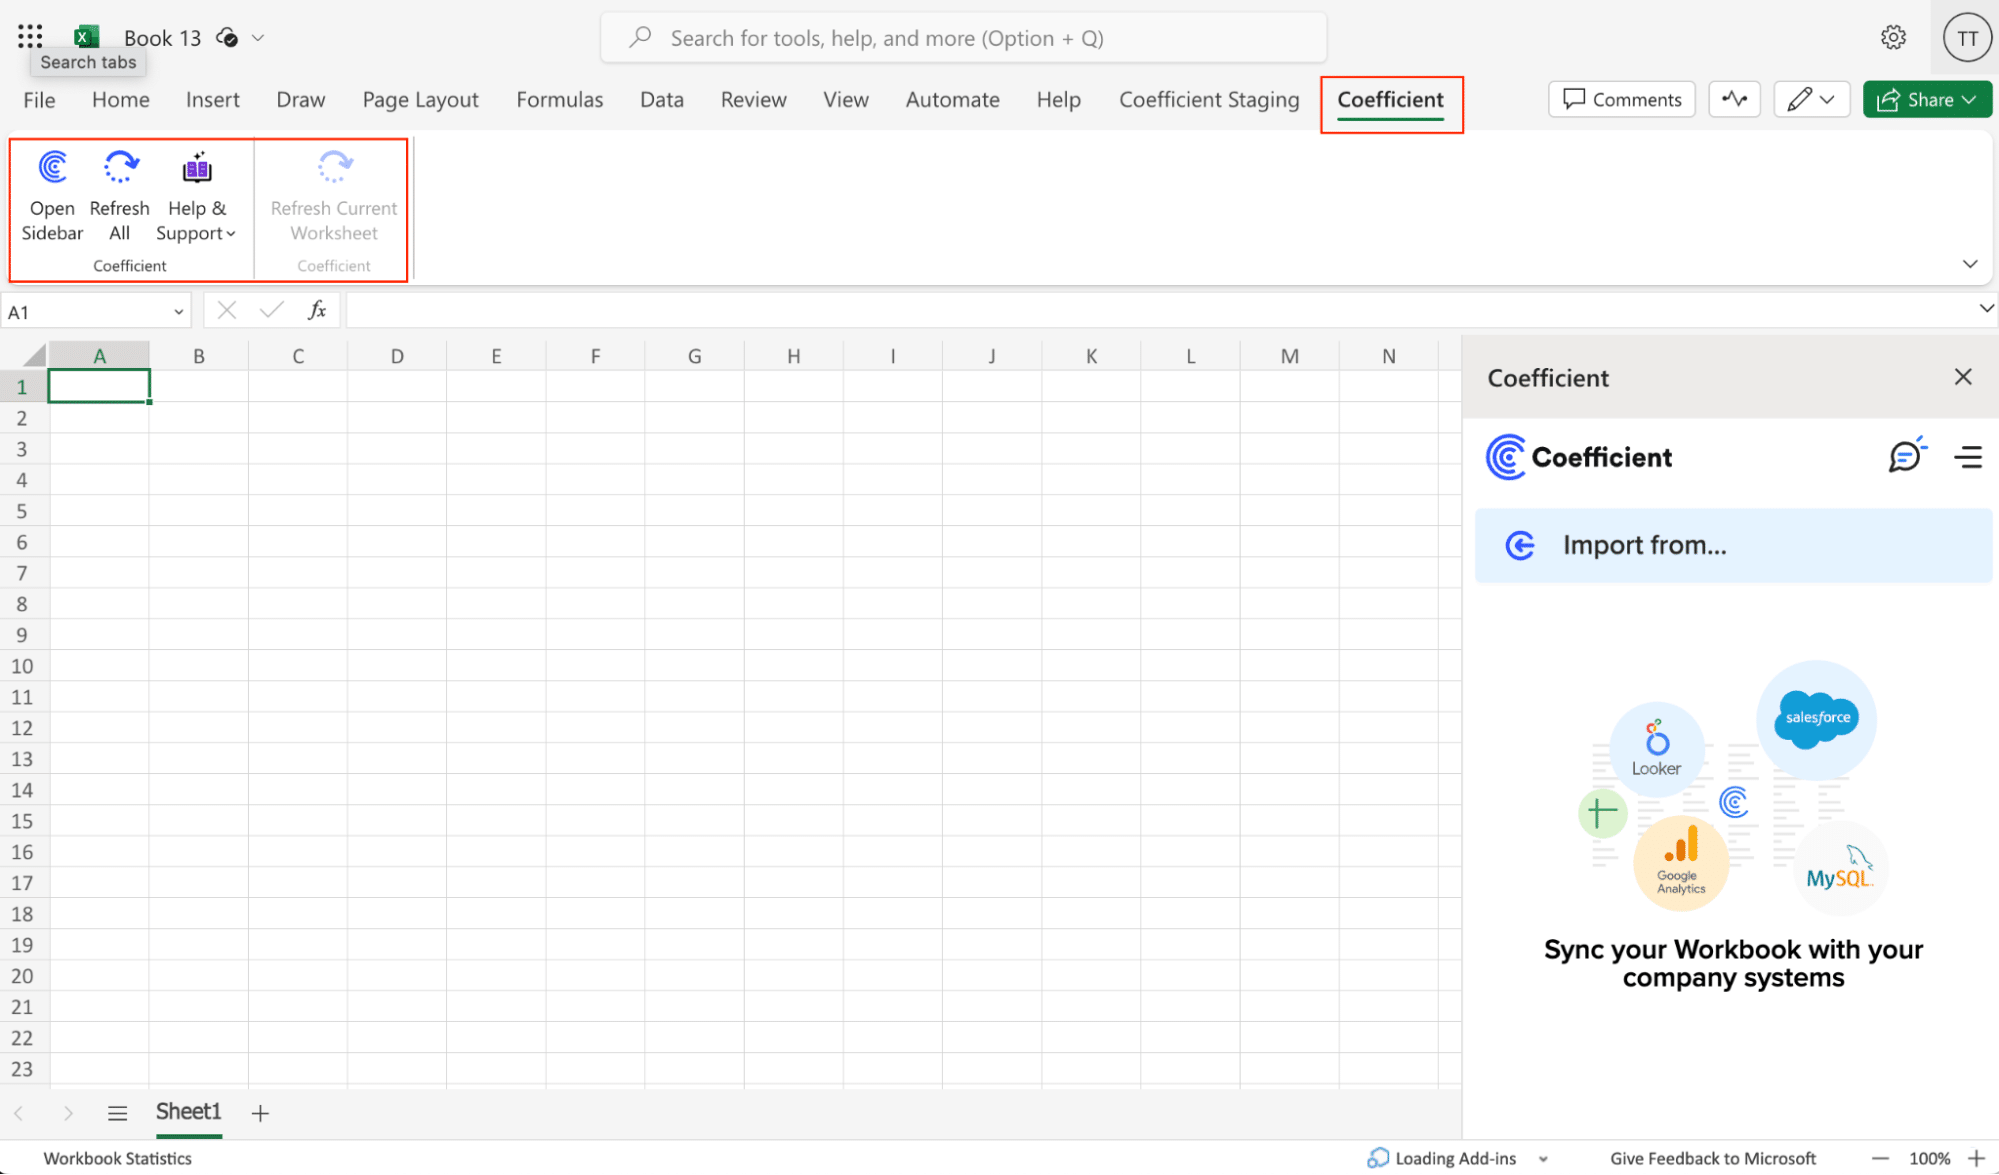 Coefficient tab added to Excel's top navigation bar after installation